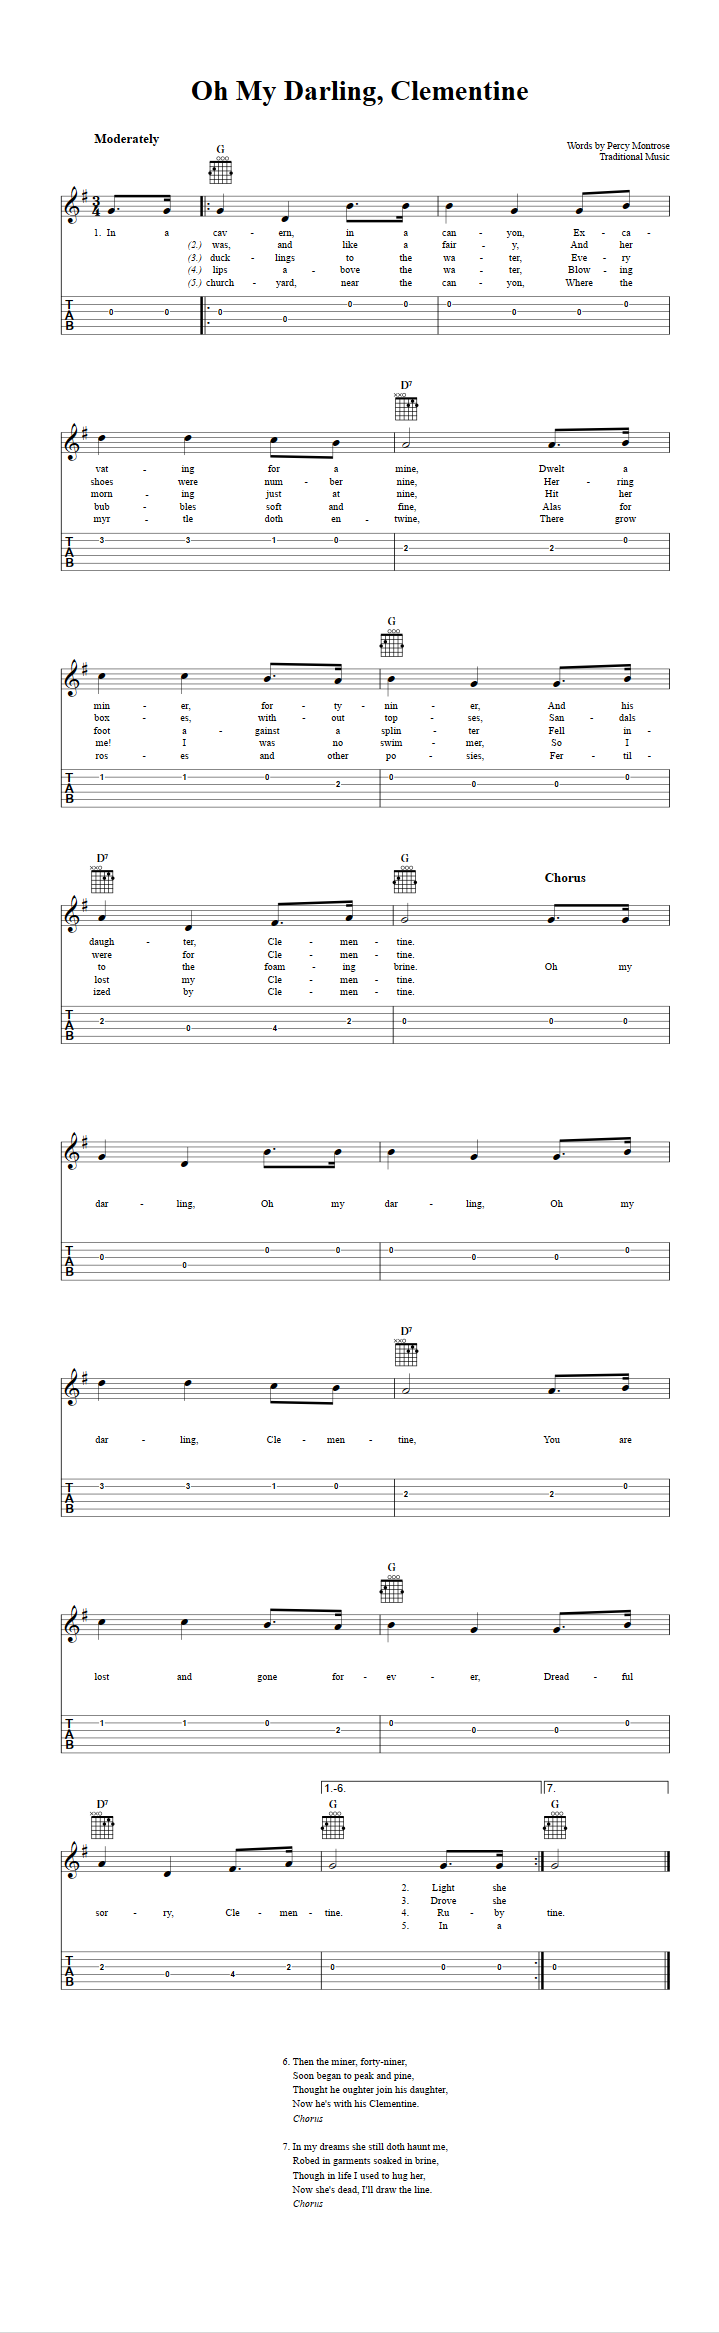 My Darling, Clementine - Easy Guitar Sheet Music and Tab with Chords and Lyrics